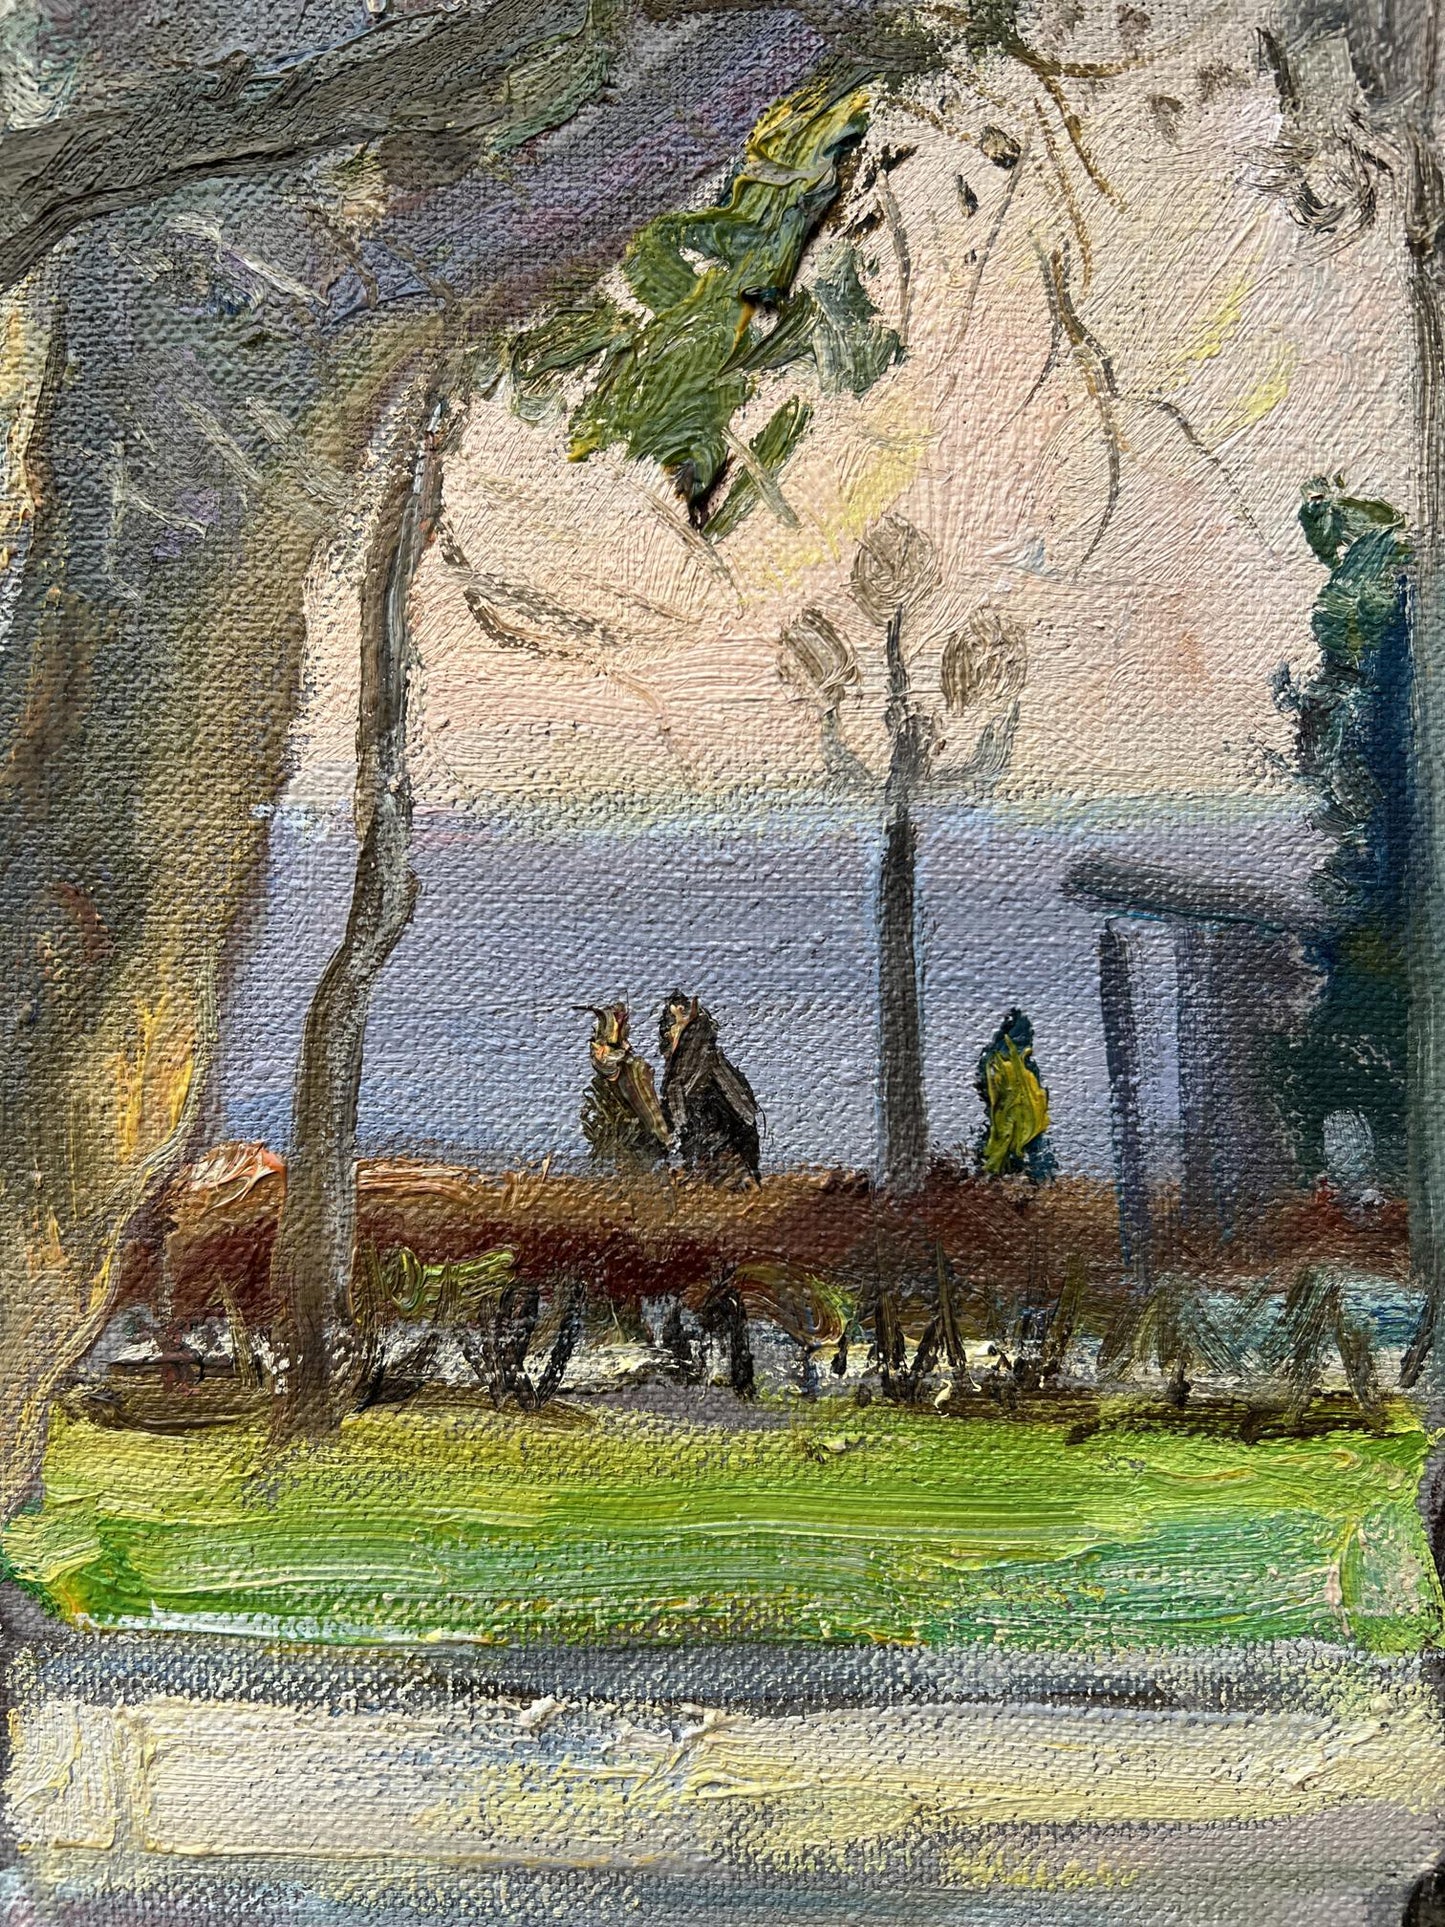 Oil painting A warm day V. Mishurovsky